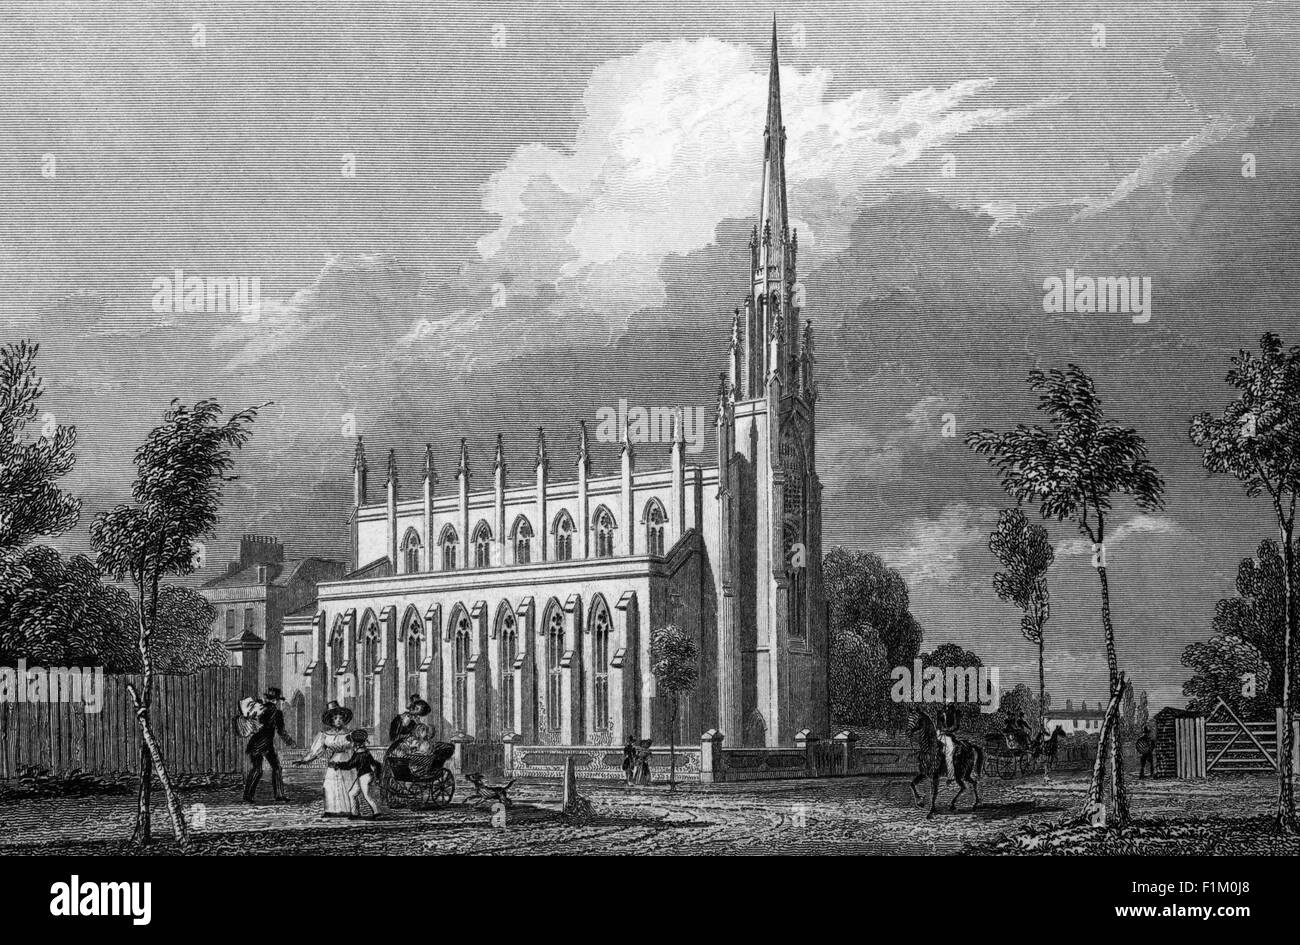 St Michael & All Angels Church completed in 1830, The spire has been nicknamed the 'Needle of Kent', or the 'Devil's Toothpick', Blackheath, London, England Stock Photo